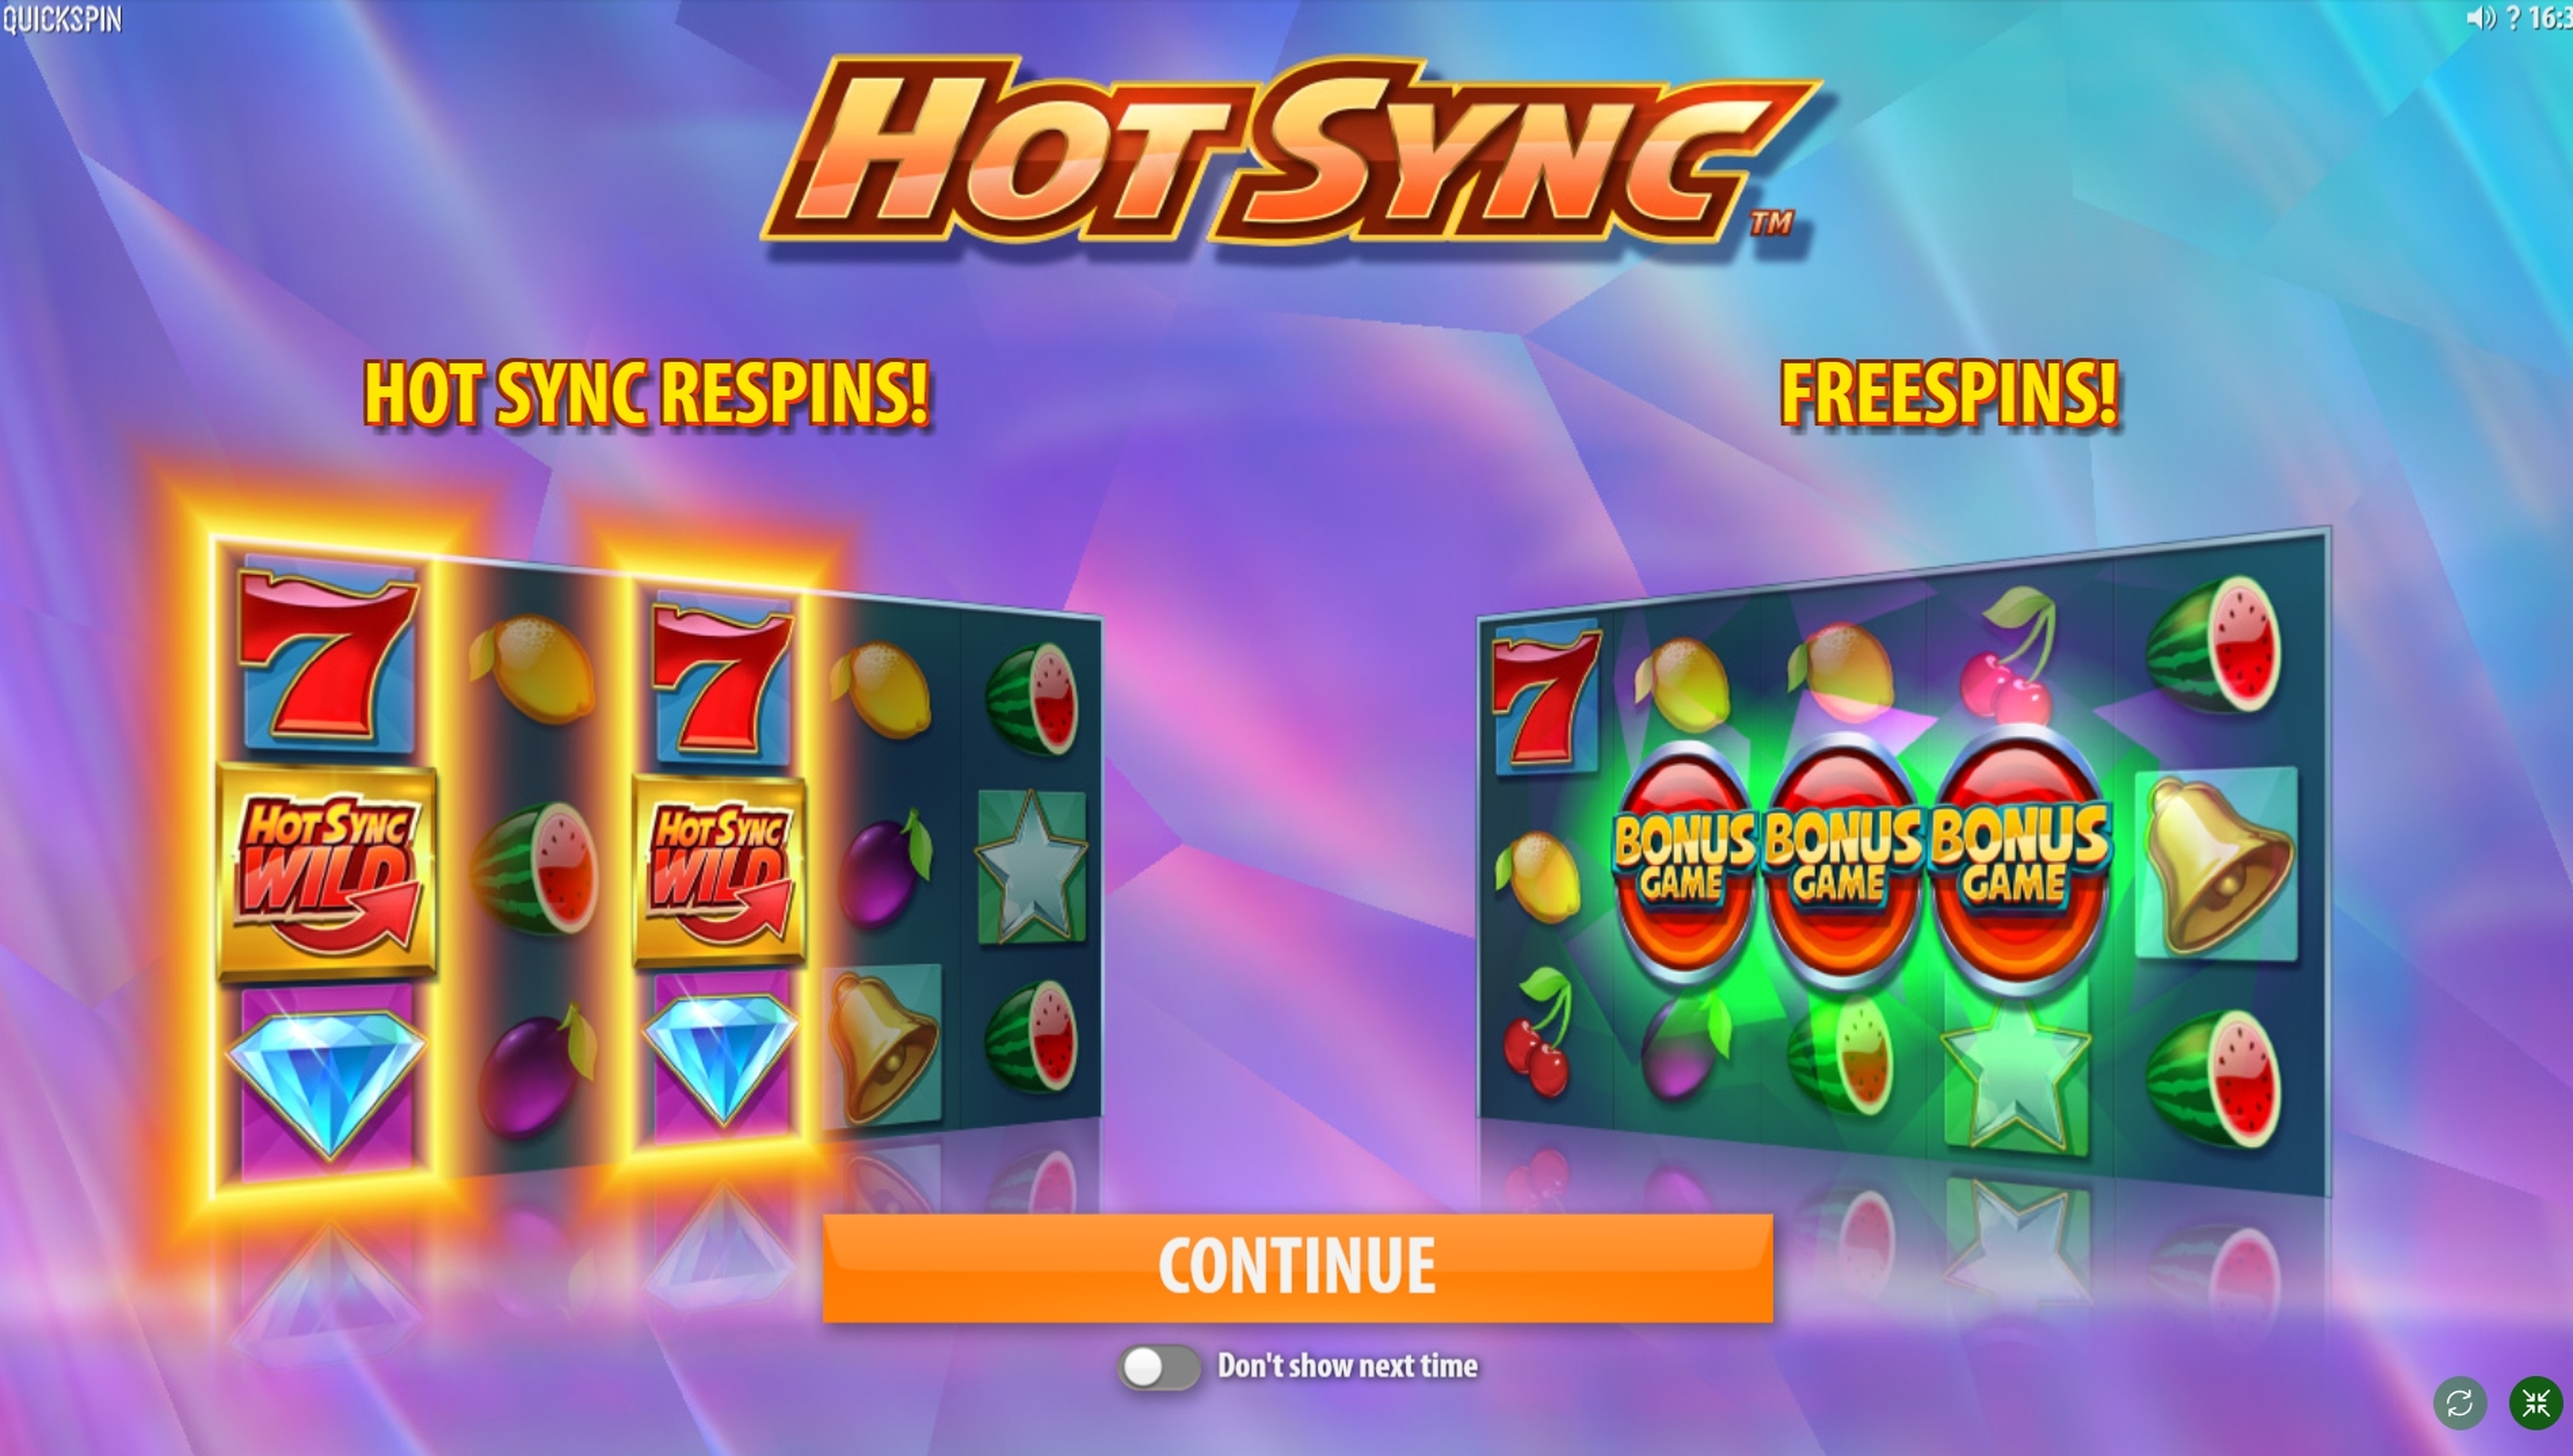 Play Hot Sync Free Casino Slot Game by Quickspin